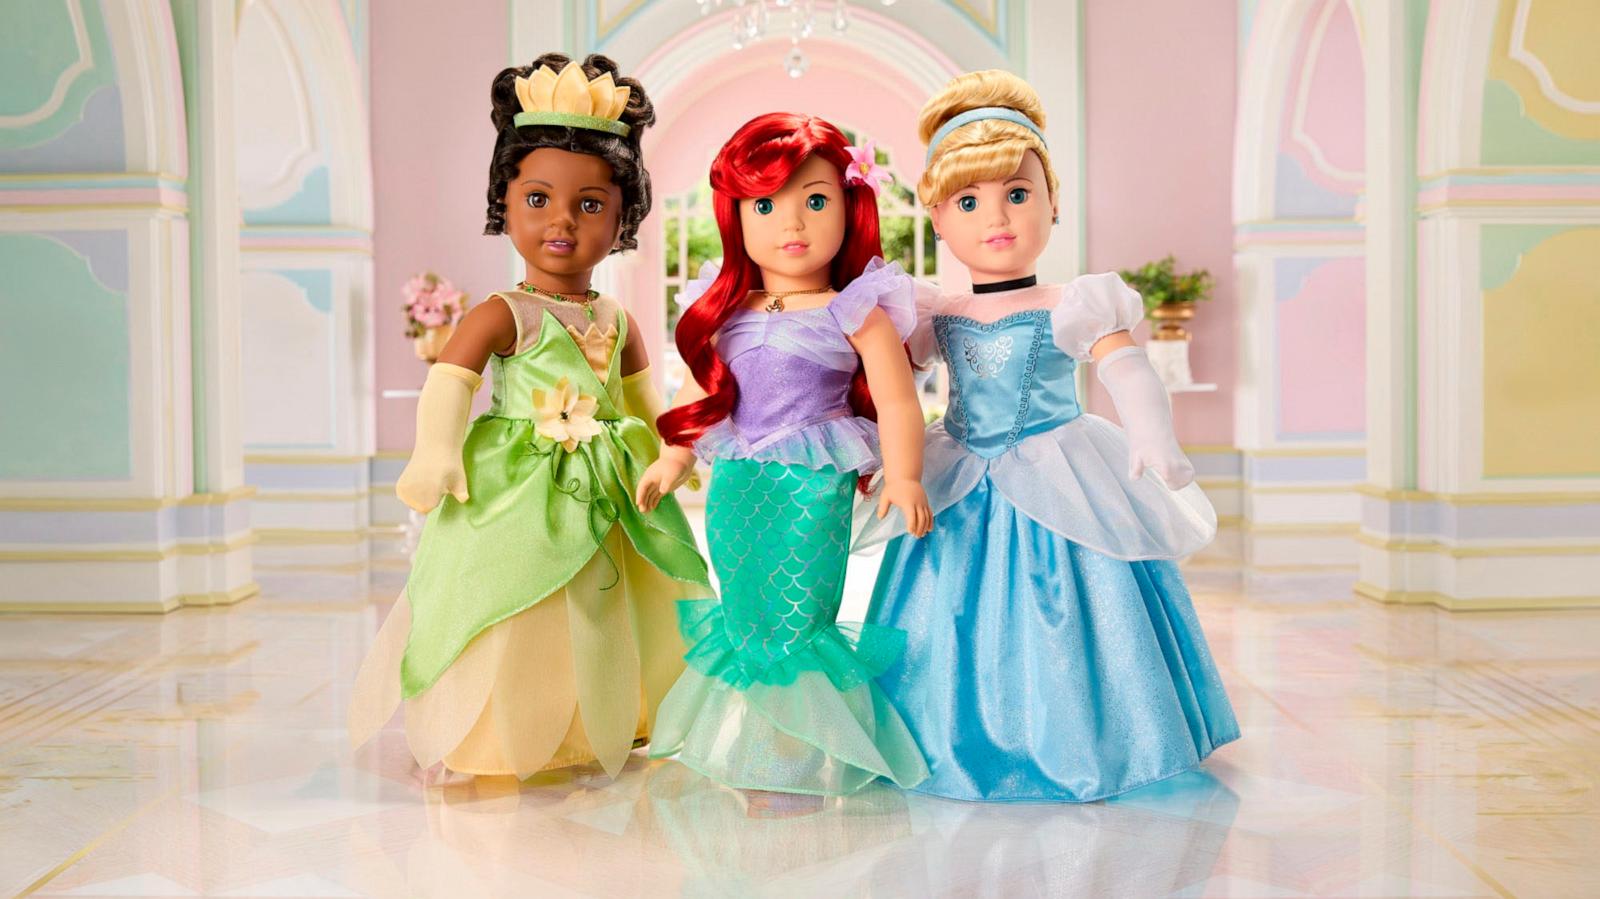 Hot Topic Launches a New Disney Princess Dress Collection